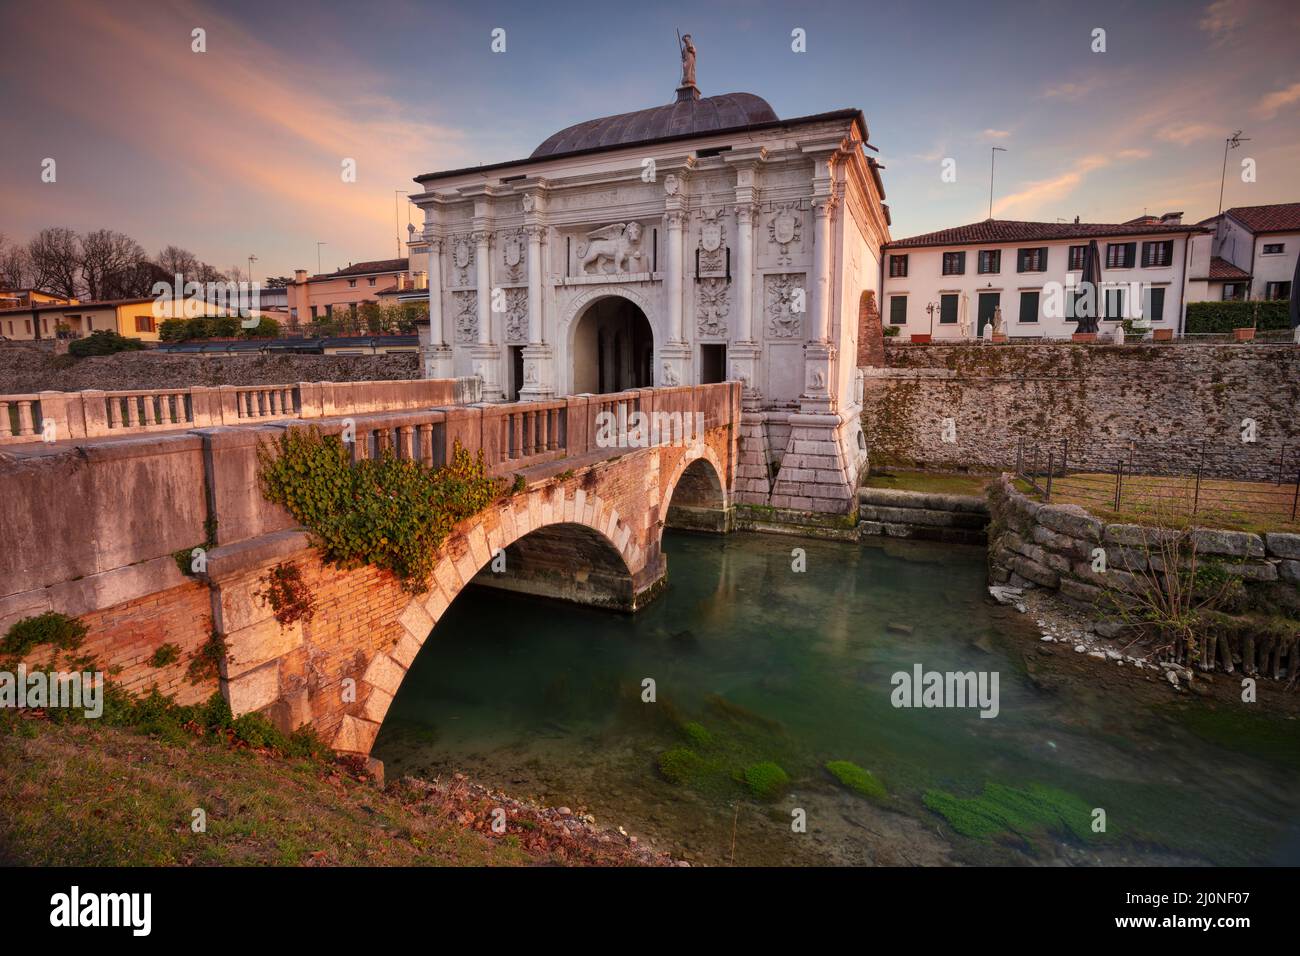 Treviso, Italy. Cityscape image of Treviso, Italy with gate to old city at sunset. Stock Photo